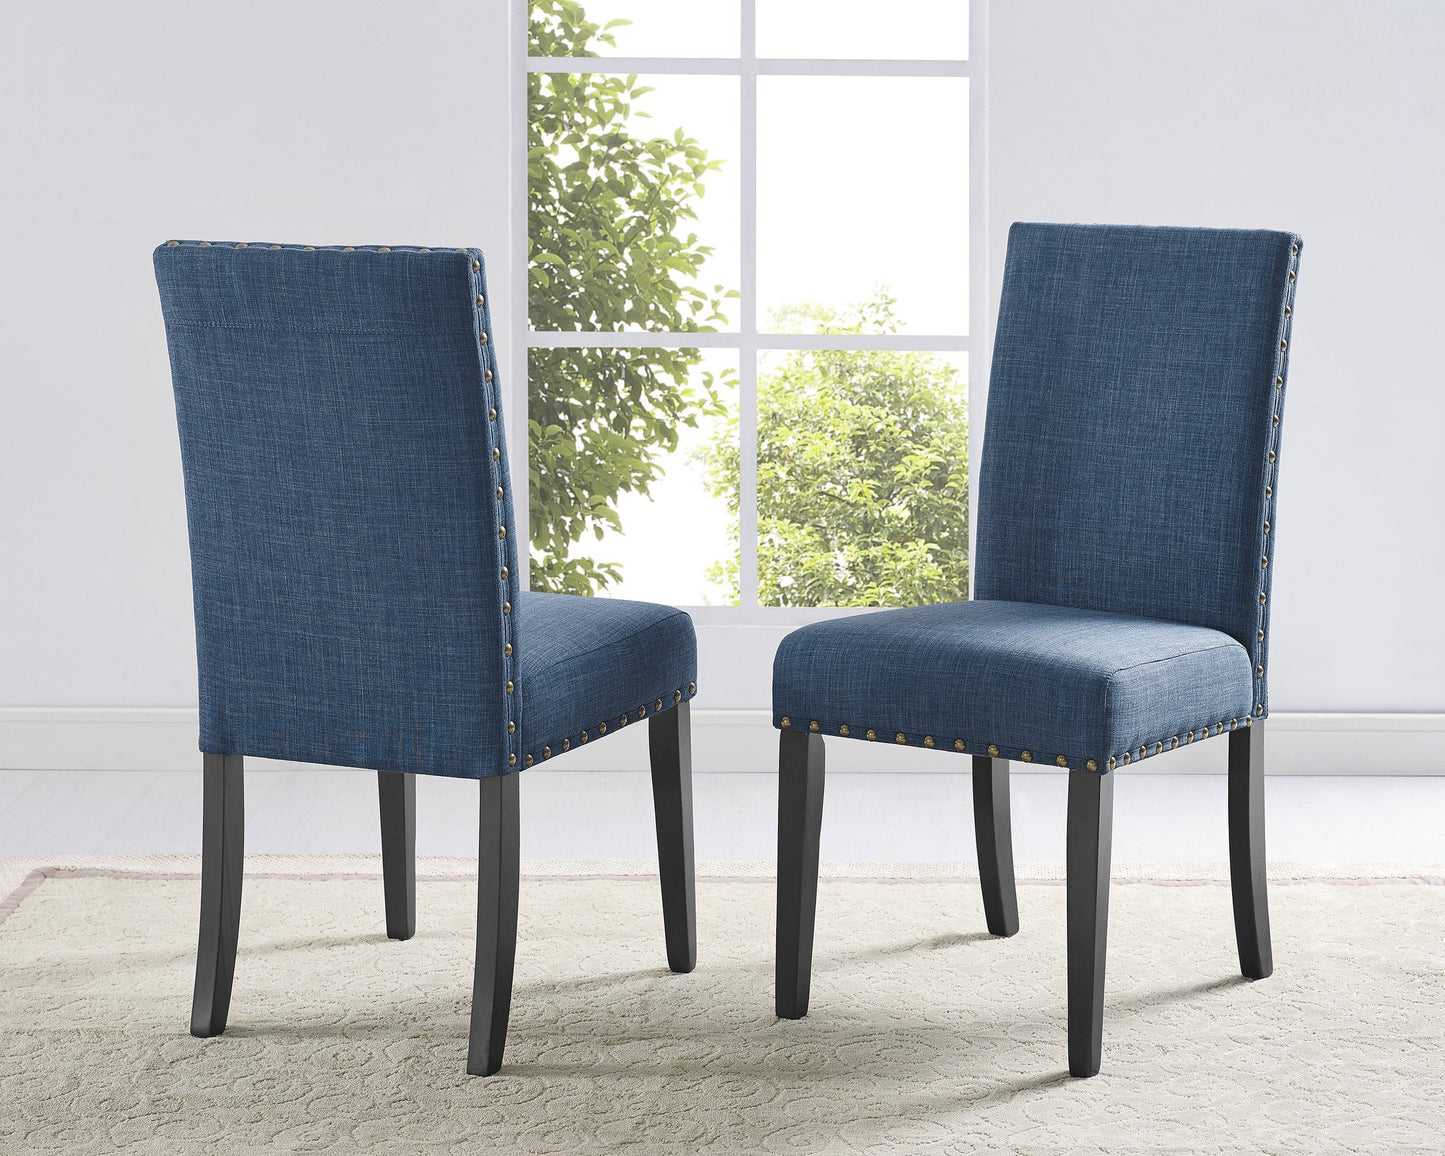 Biony Blue Fabric Dining Chairs with Nailhead Trim, Set of 2